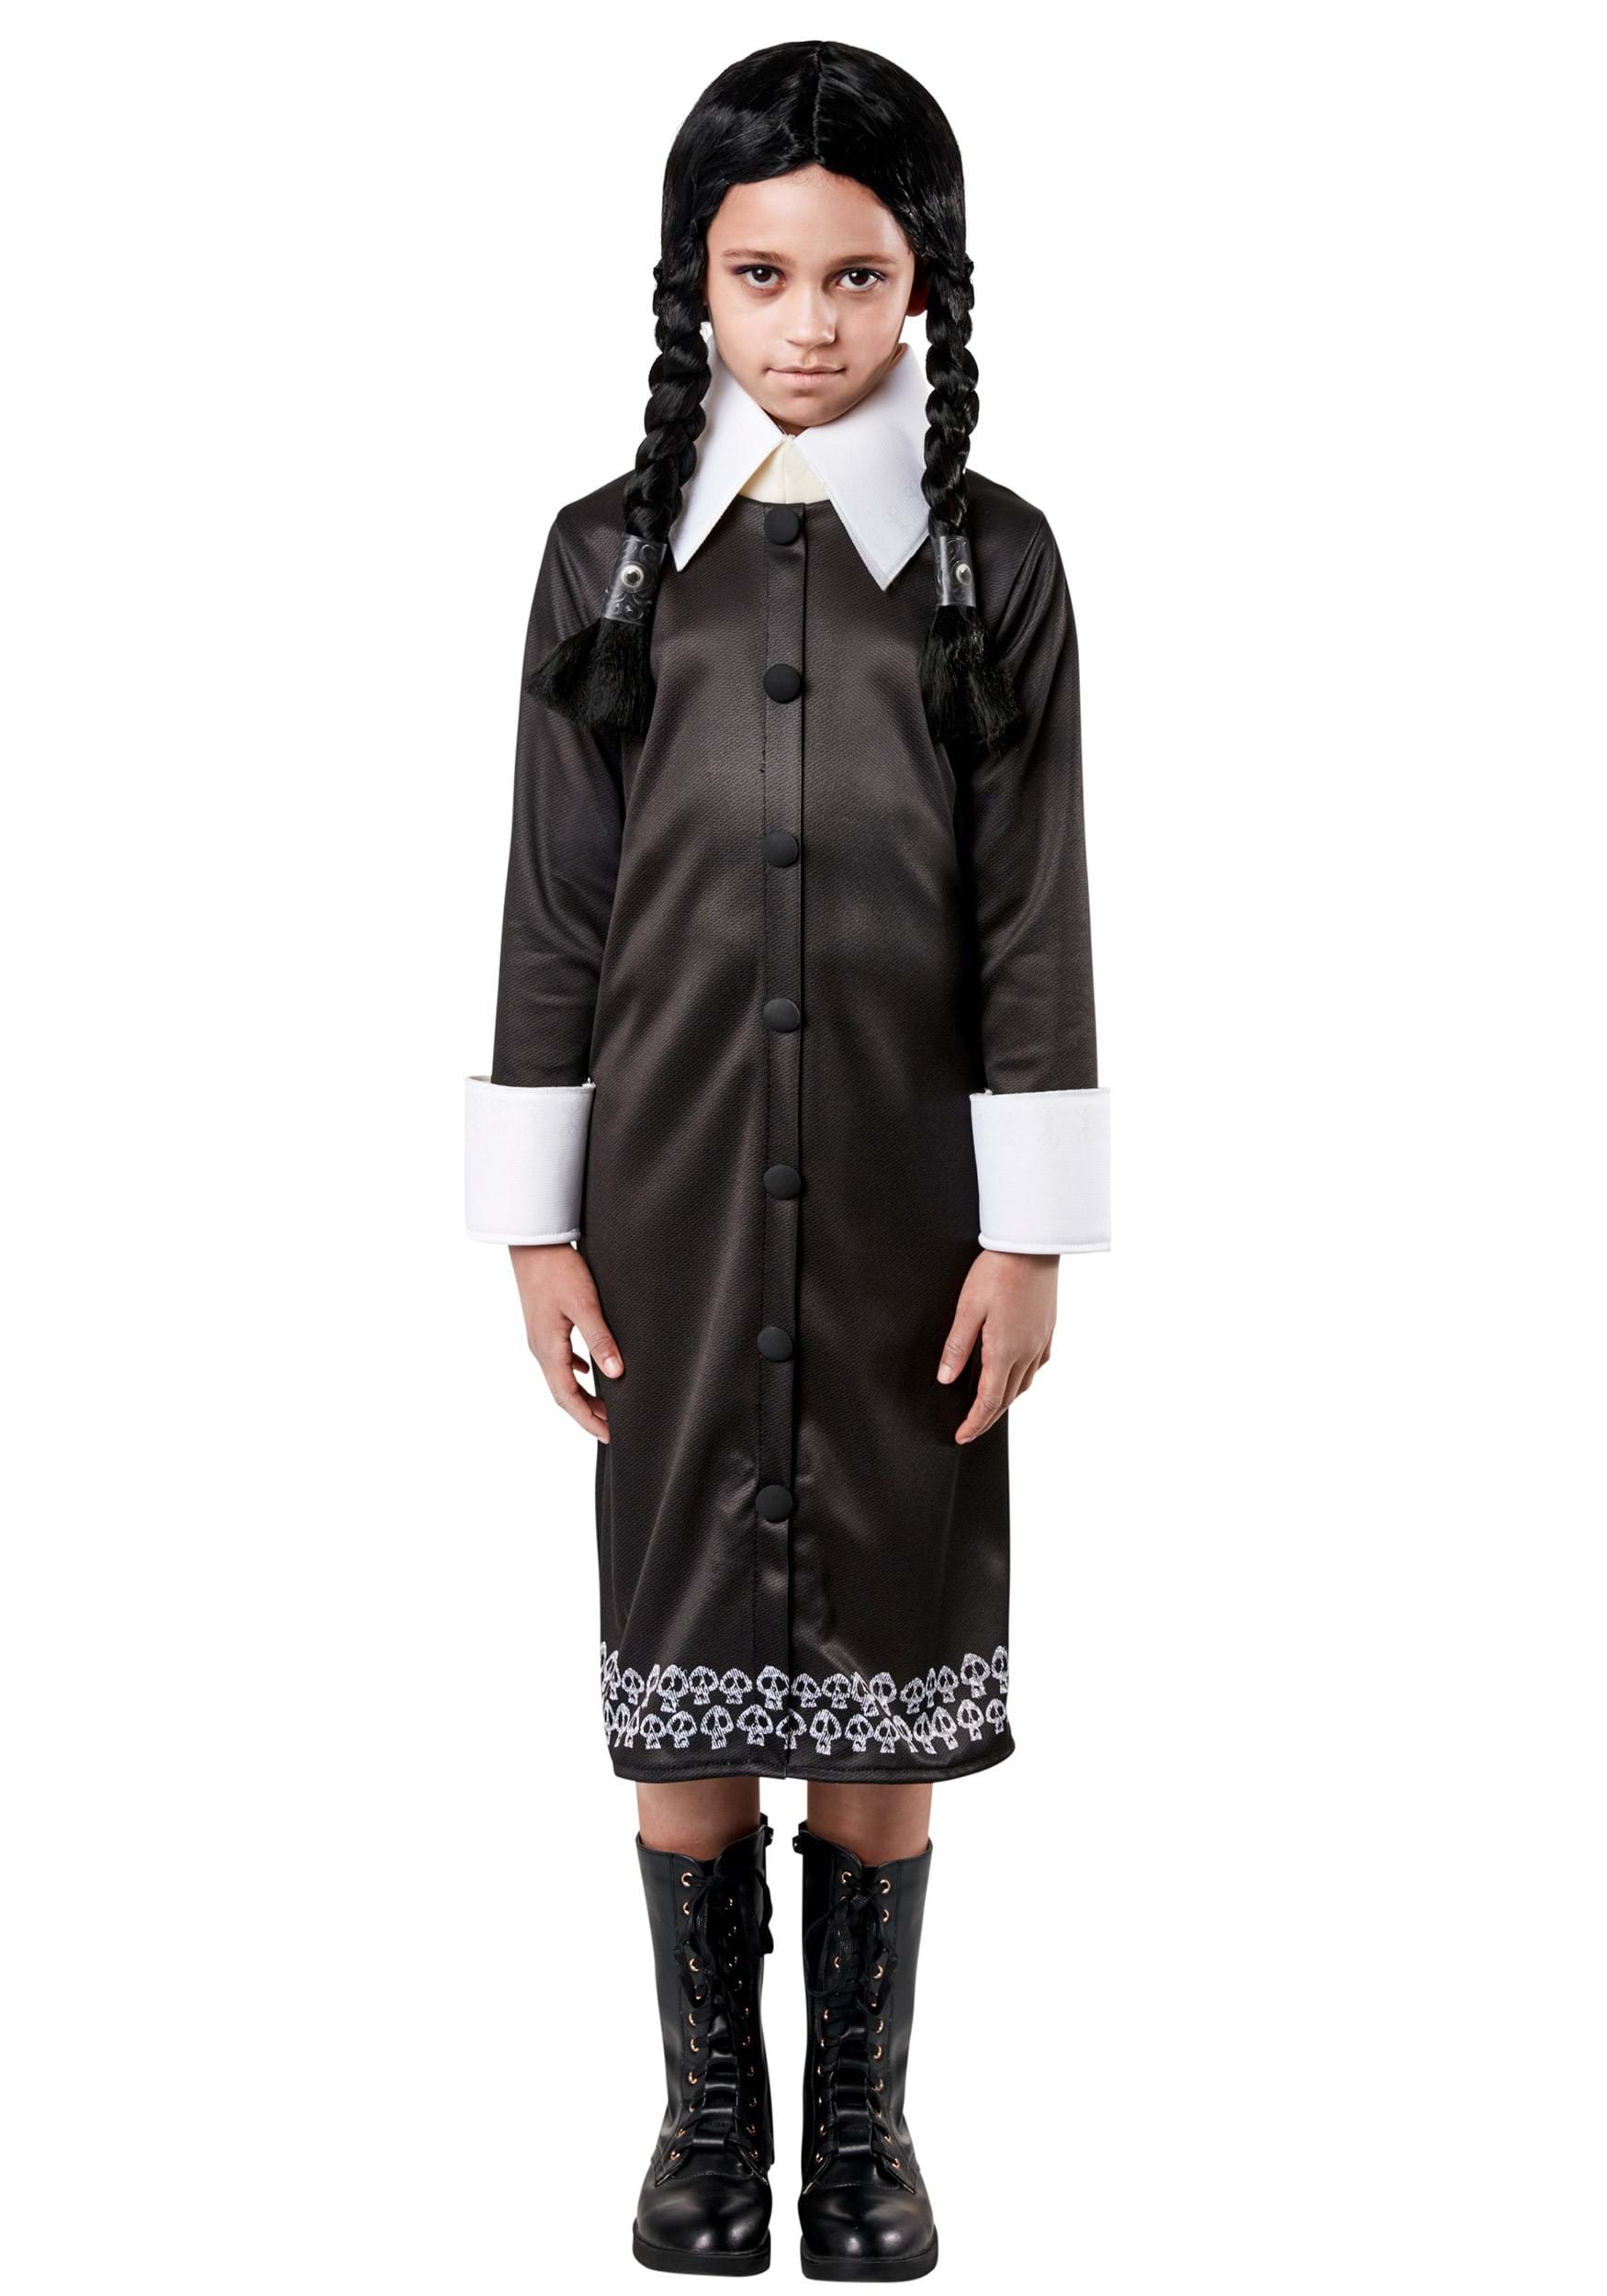 Kid's The Addams Family 2 Wednesday Fancy Dress Costume